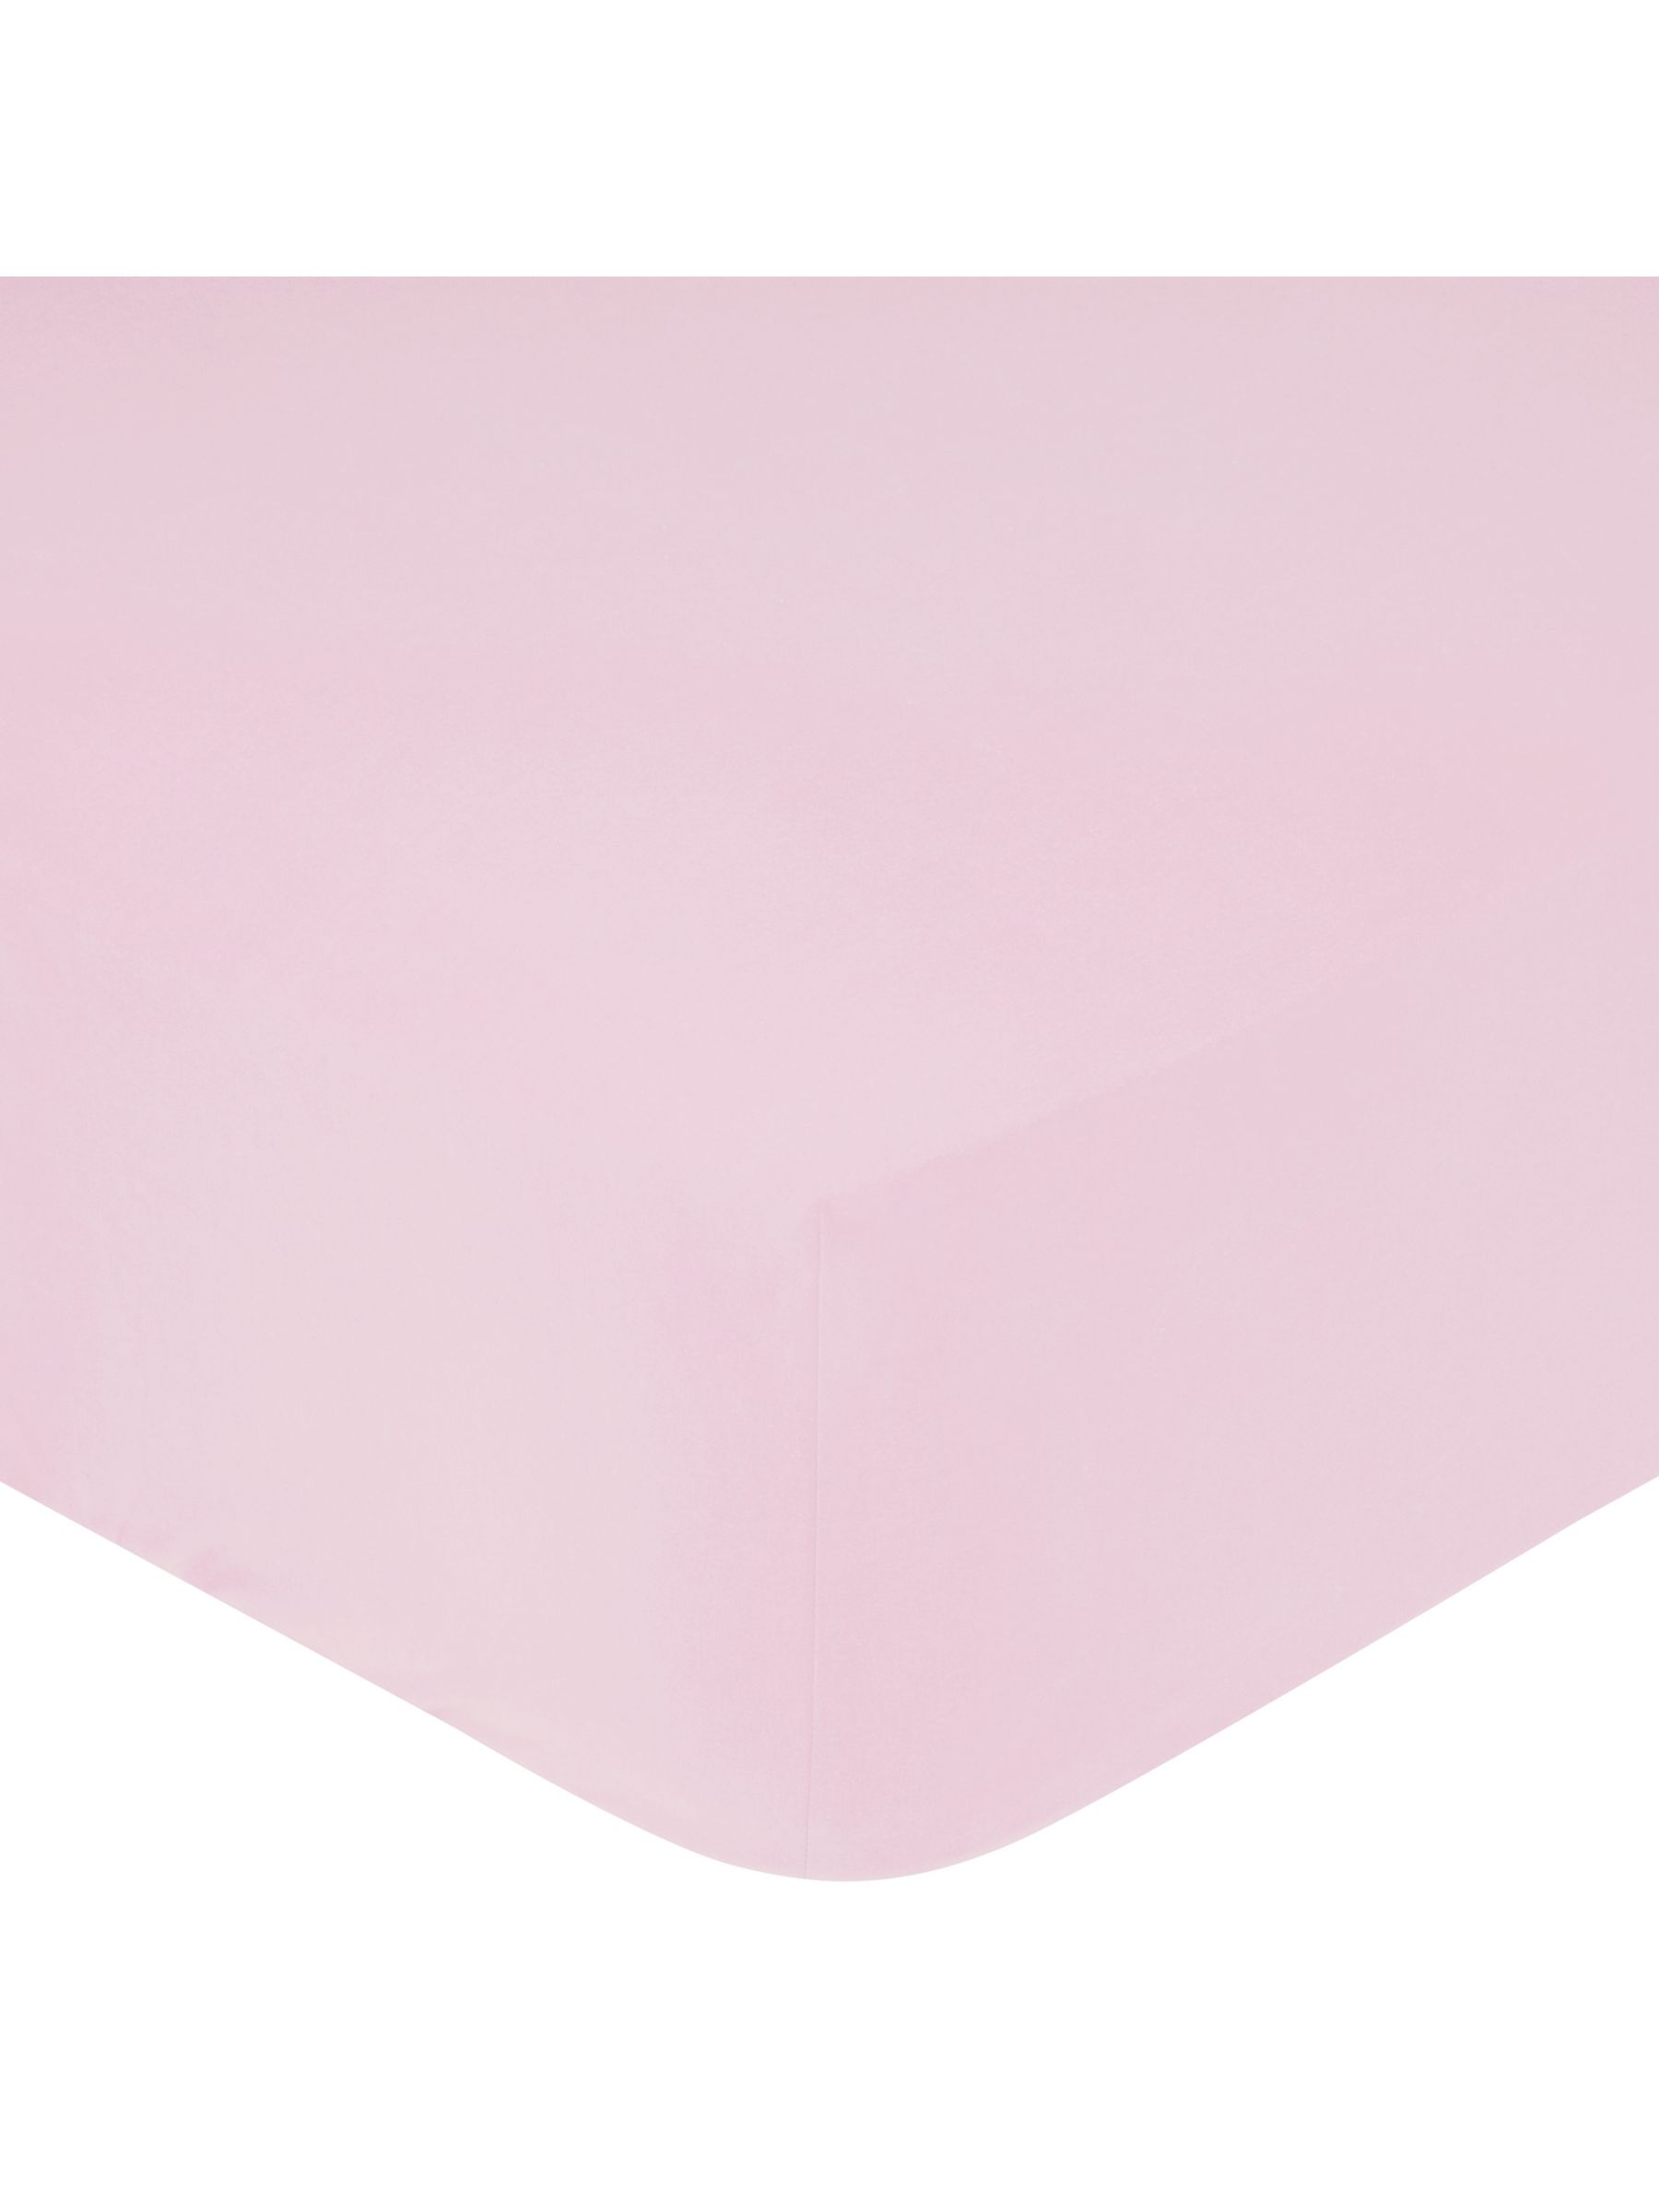 John Lewis 200 Thread Count Fitted Sheet, Single, Pink